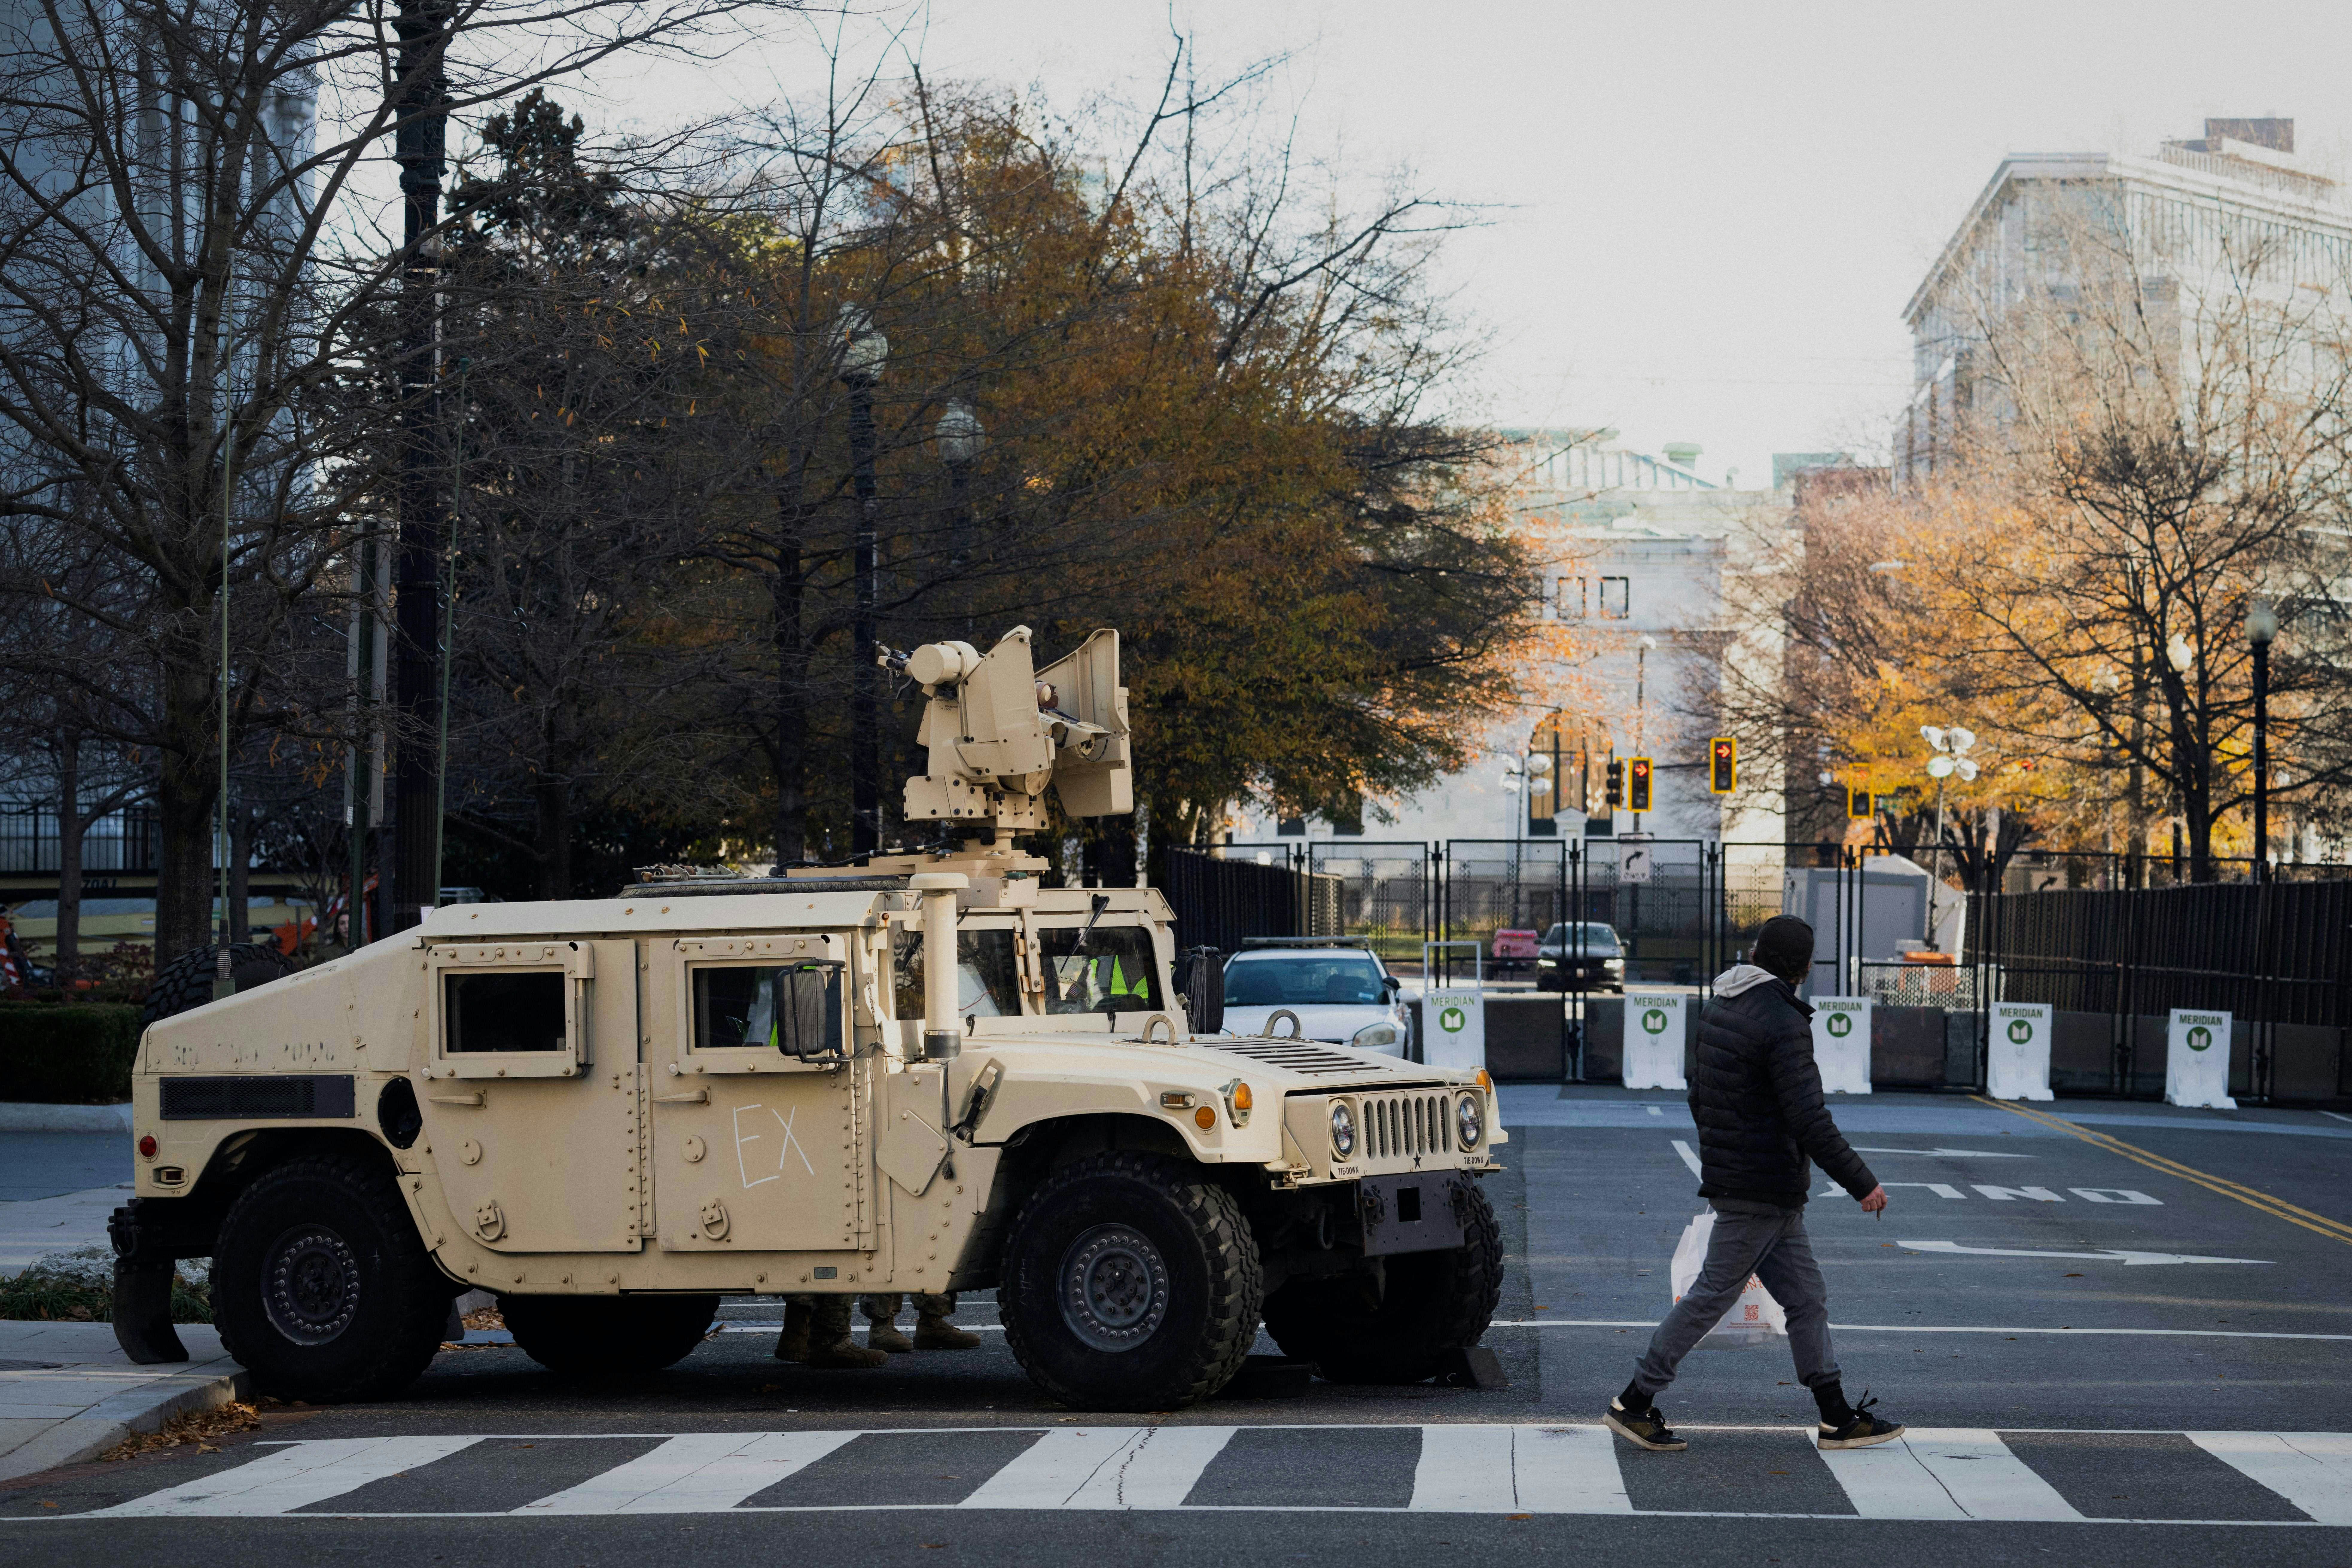 Members of the National Guard block the streets near the Walter E. Washington Convention Center, the site of the US-Africa Leaders Summit that brings together leaders from across Africa to meet with US President Joe Biden and other US representatives, in Washington, DC, December 13, 2022. (Photo by SAUL LOEB / AFP) (Photo by SAUL LOEB/AFP via Getty Images)